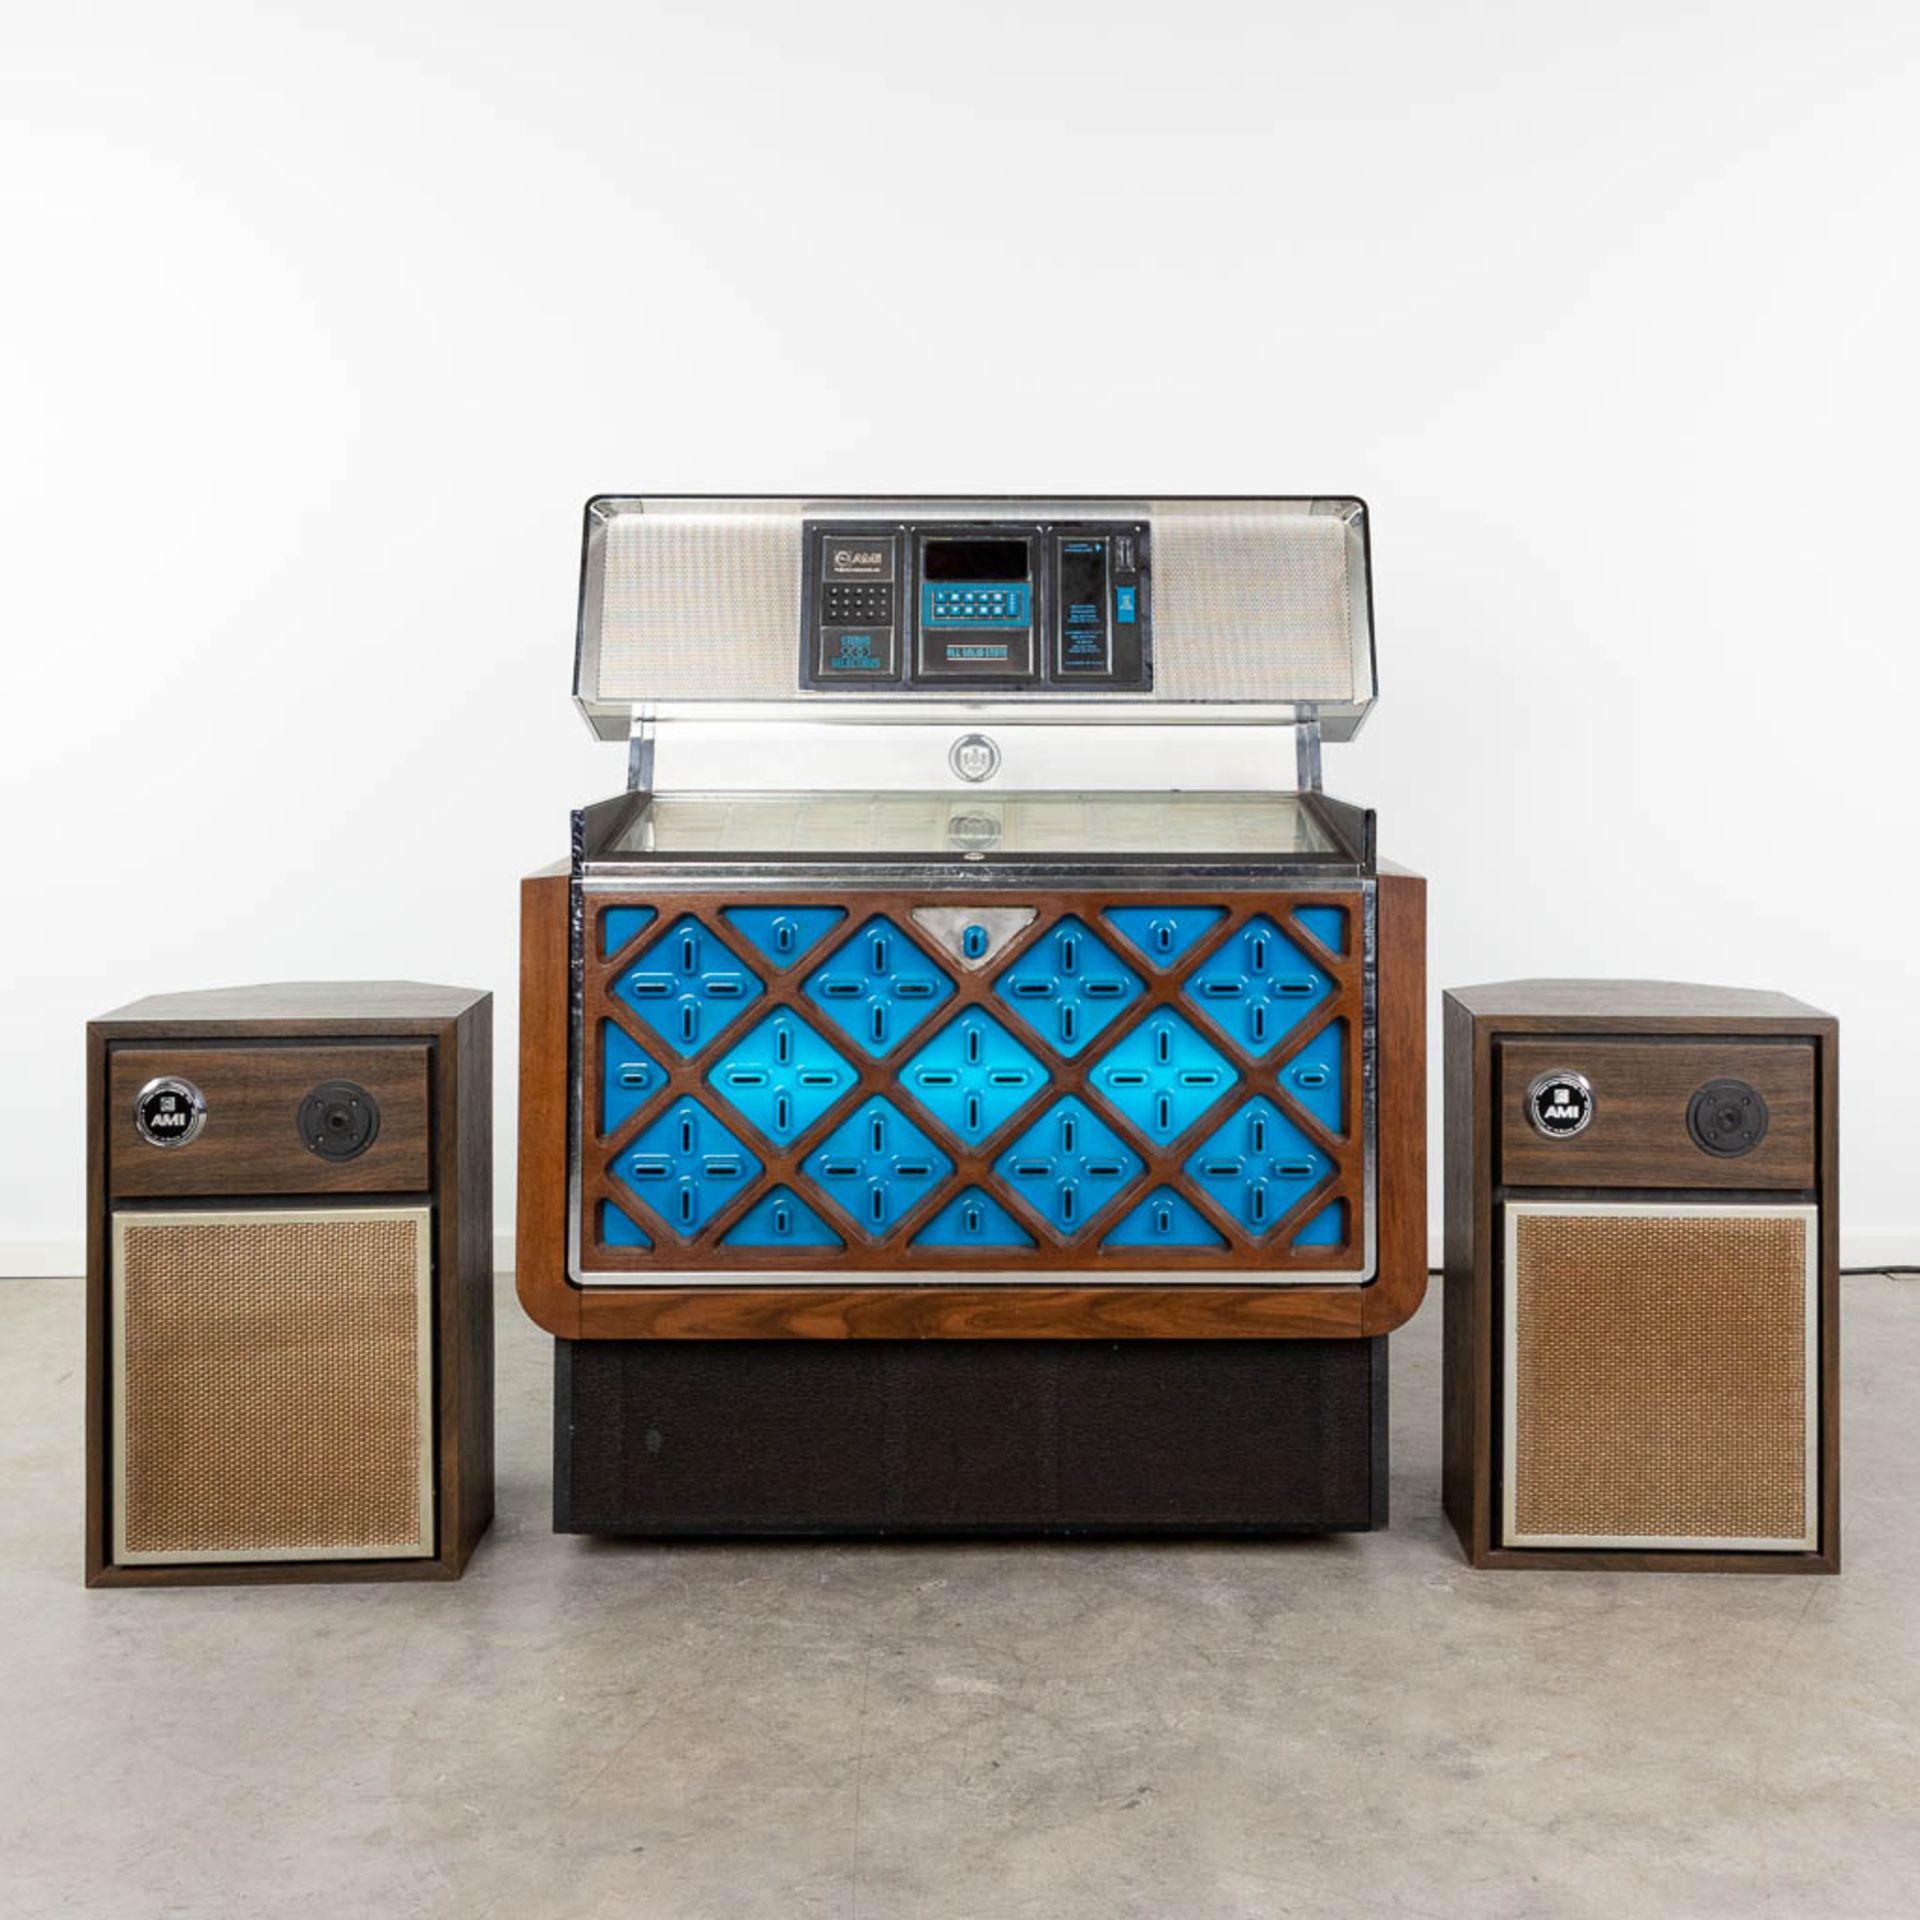 AMI R-81, a vintage jukebox with matching AMI speakers and a control unit. (L:70 x W:106 x H:130 cm